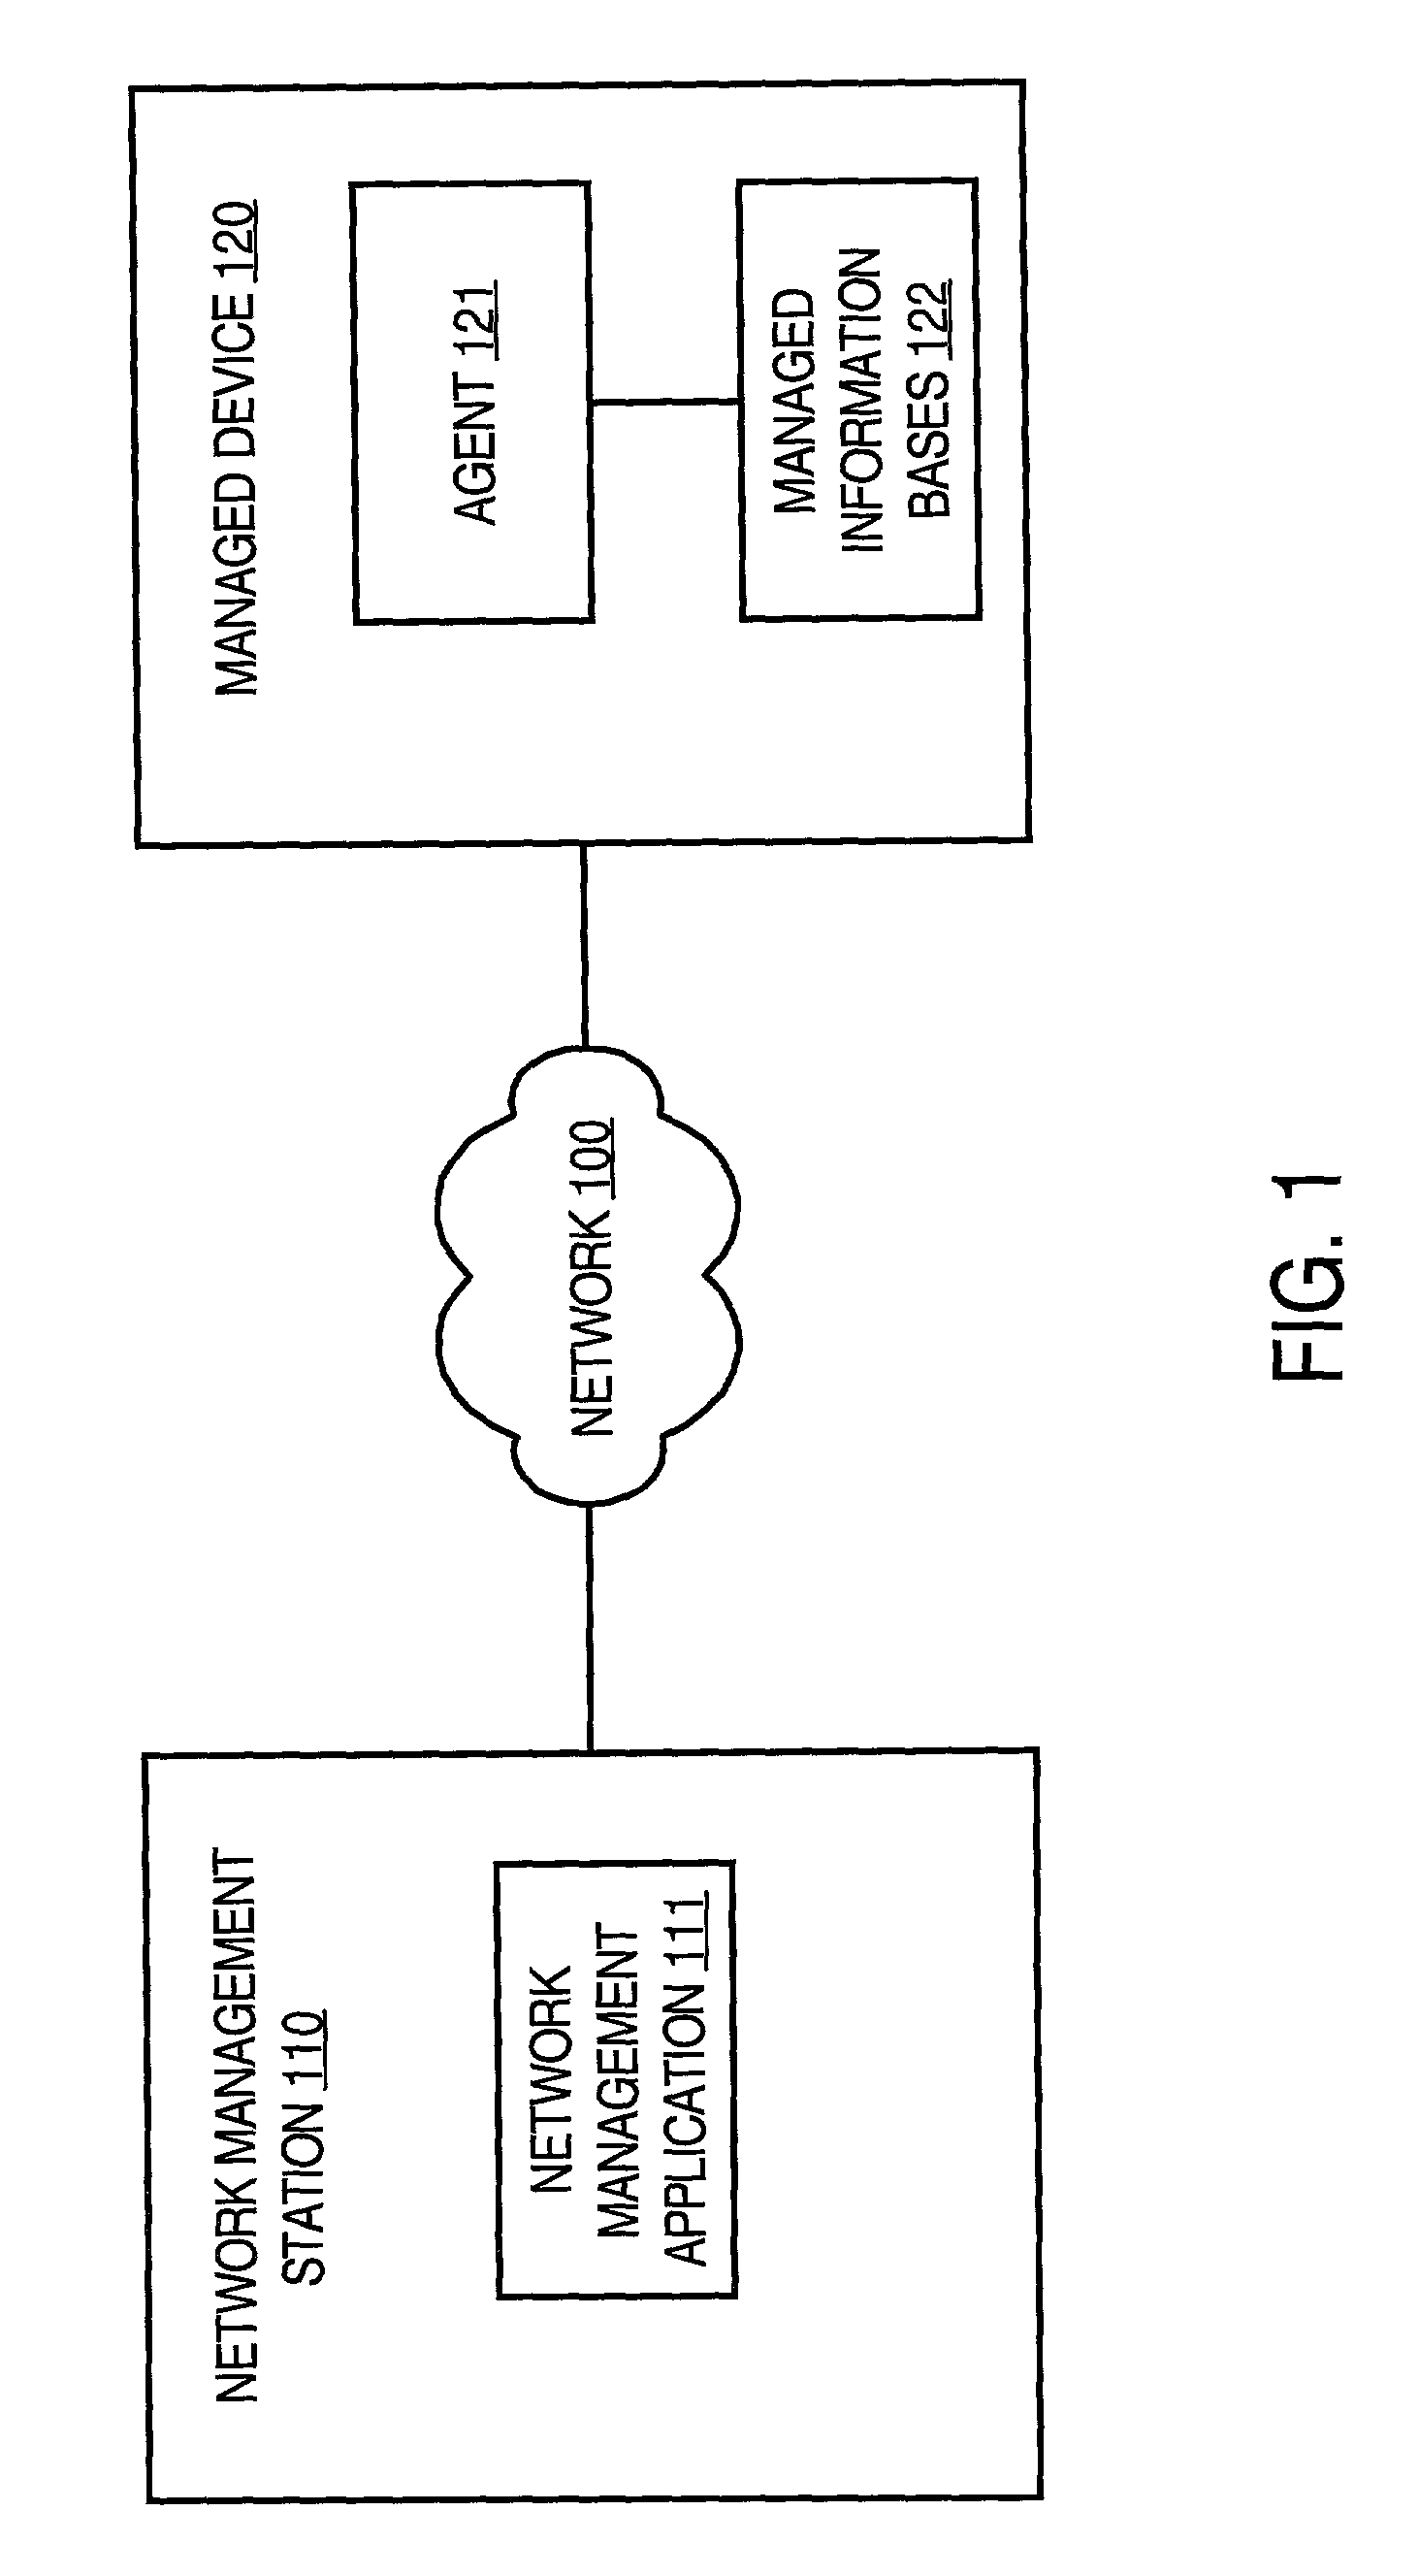 Method and apparatus for managing network devices using a parsable string that conforms to a specified grammar